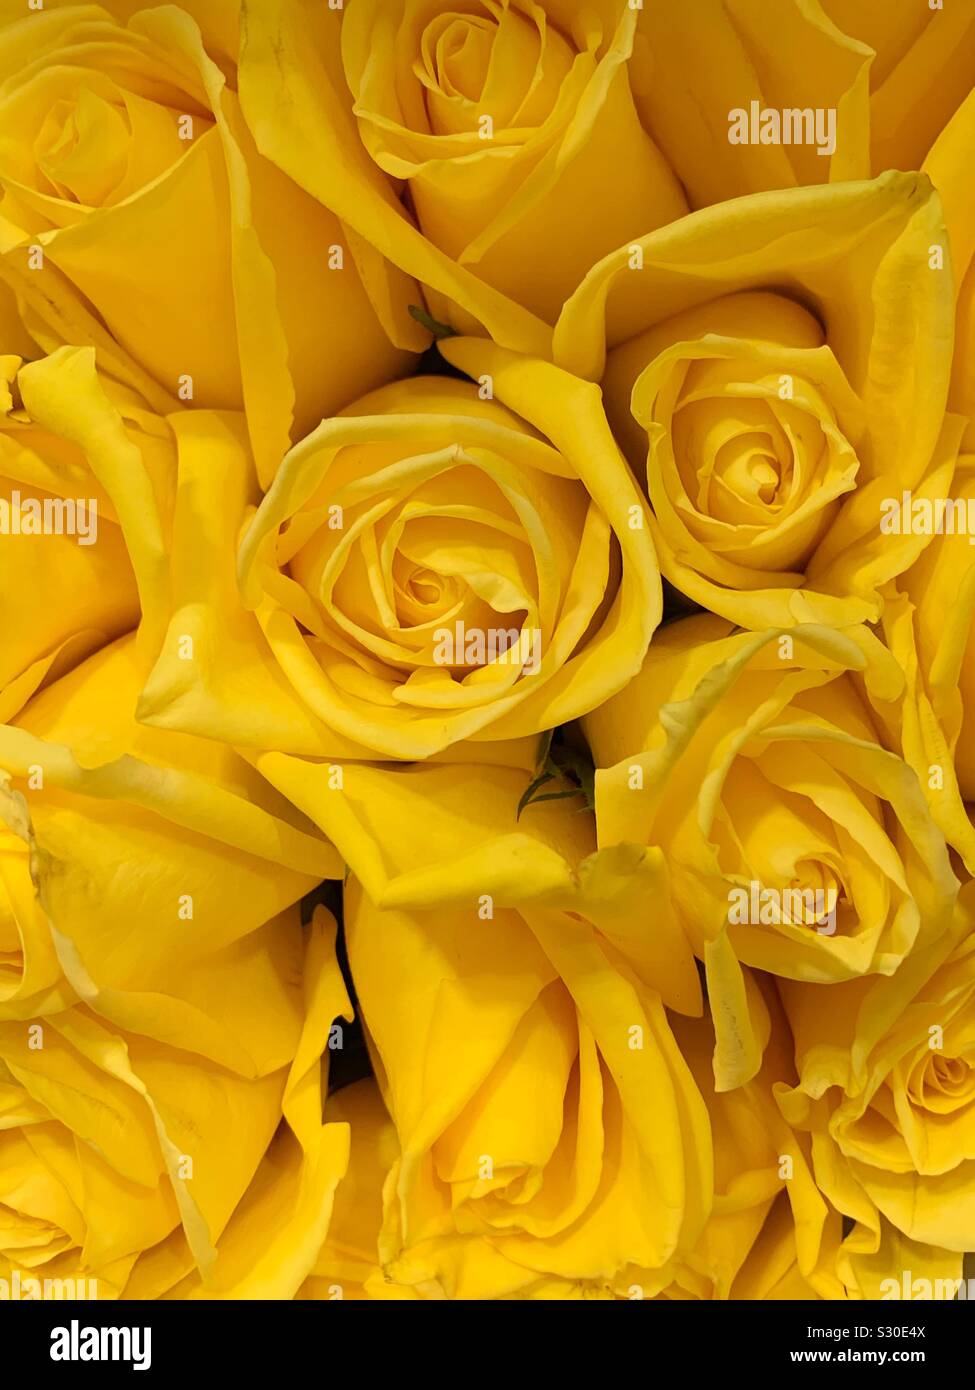 Bouquet of fresh yellow roses Stock Photo